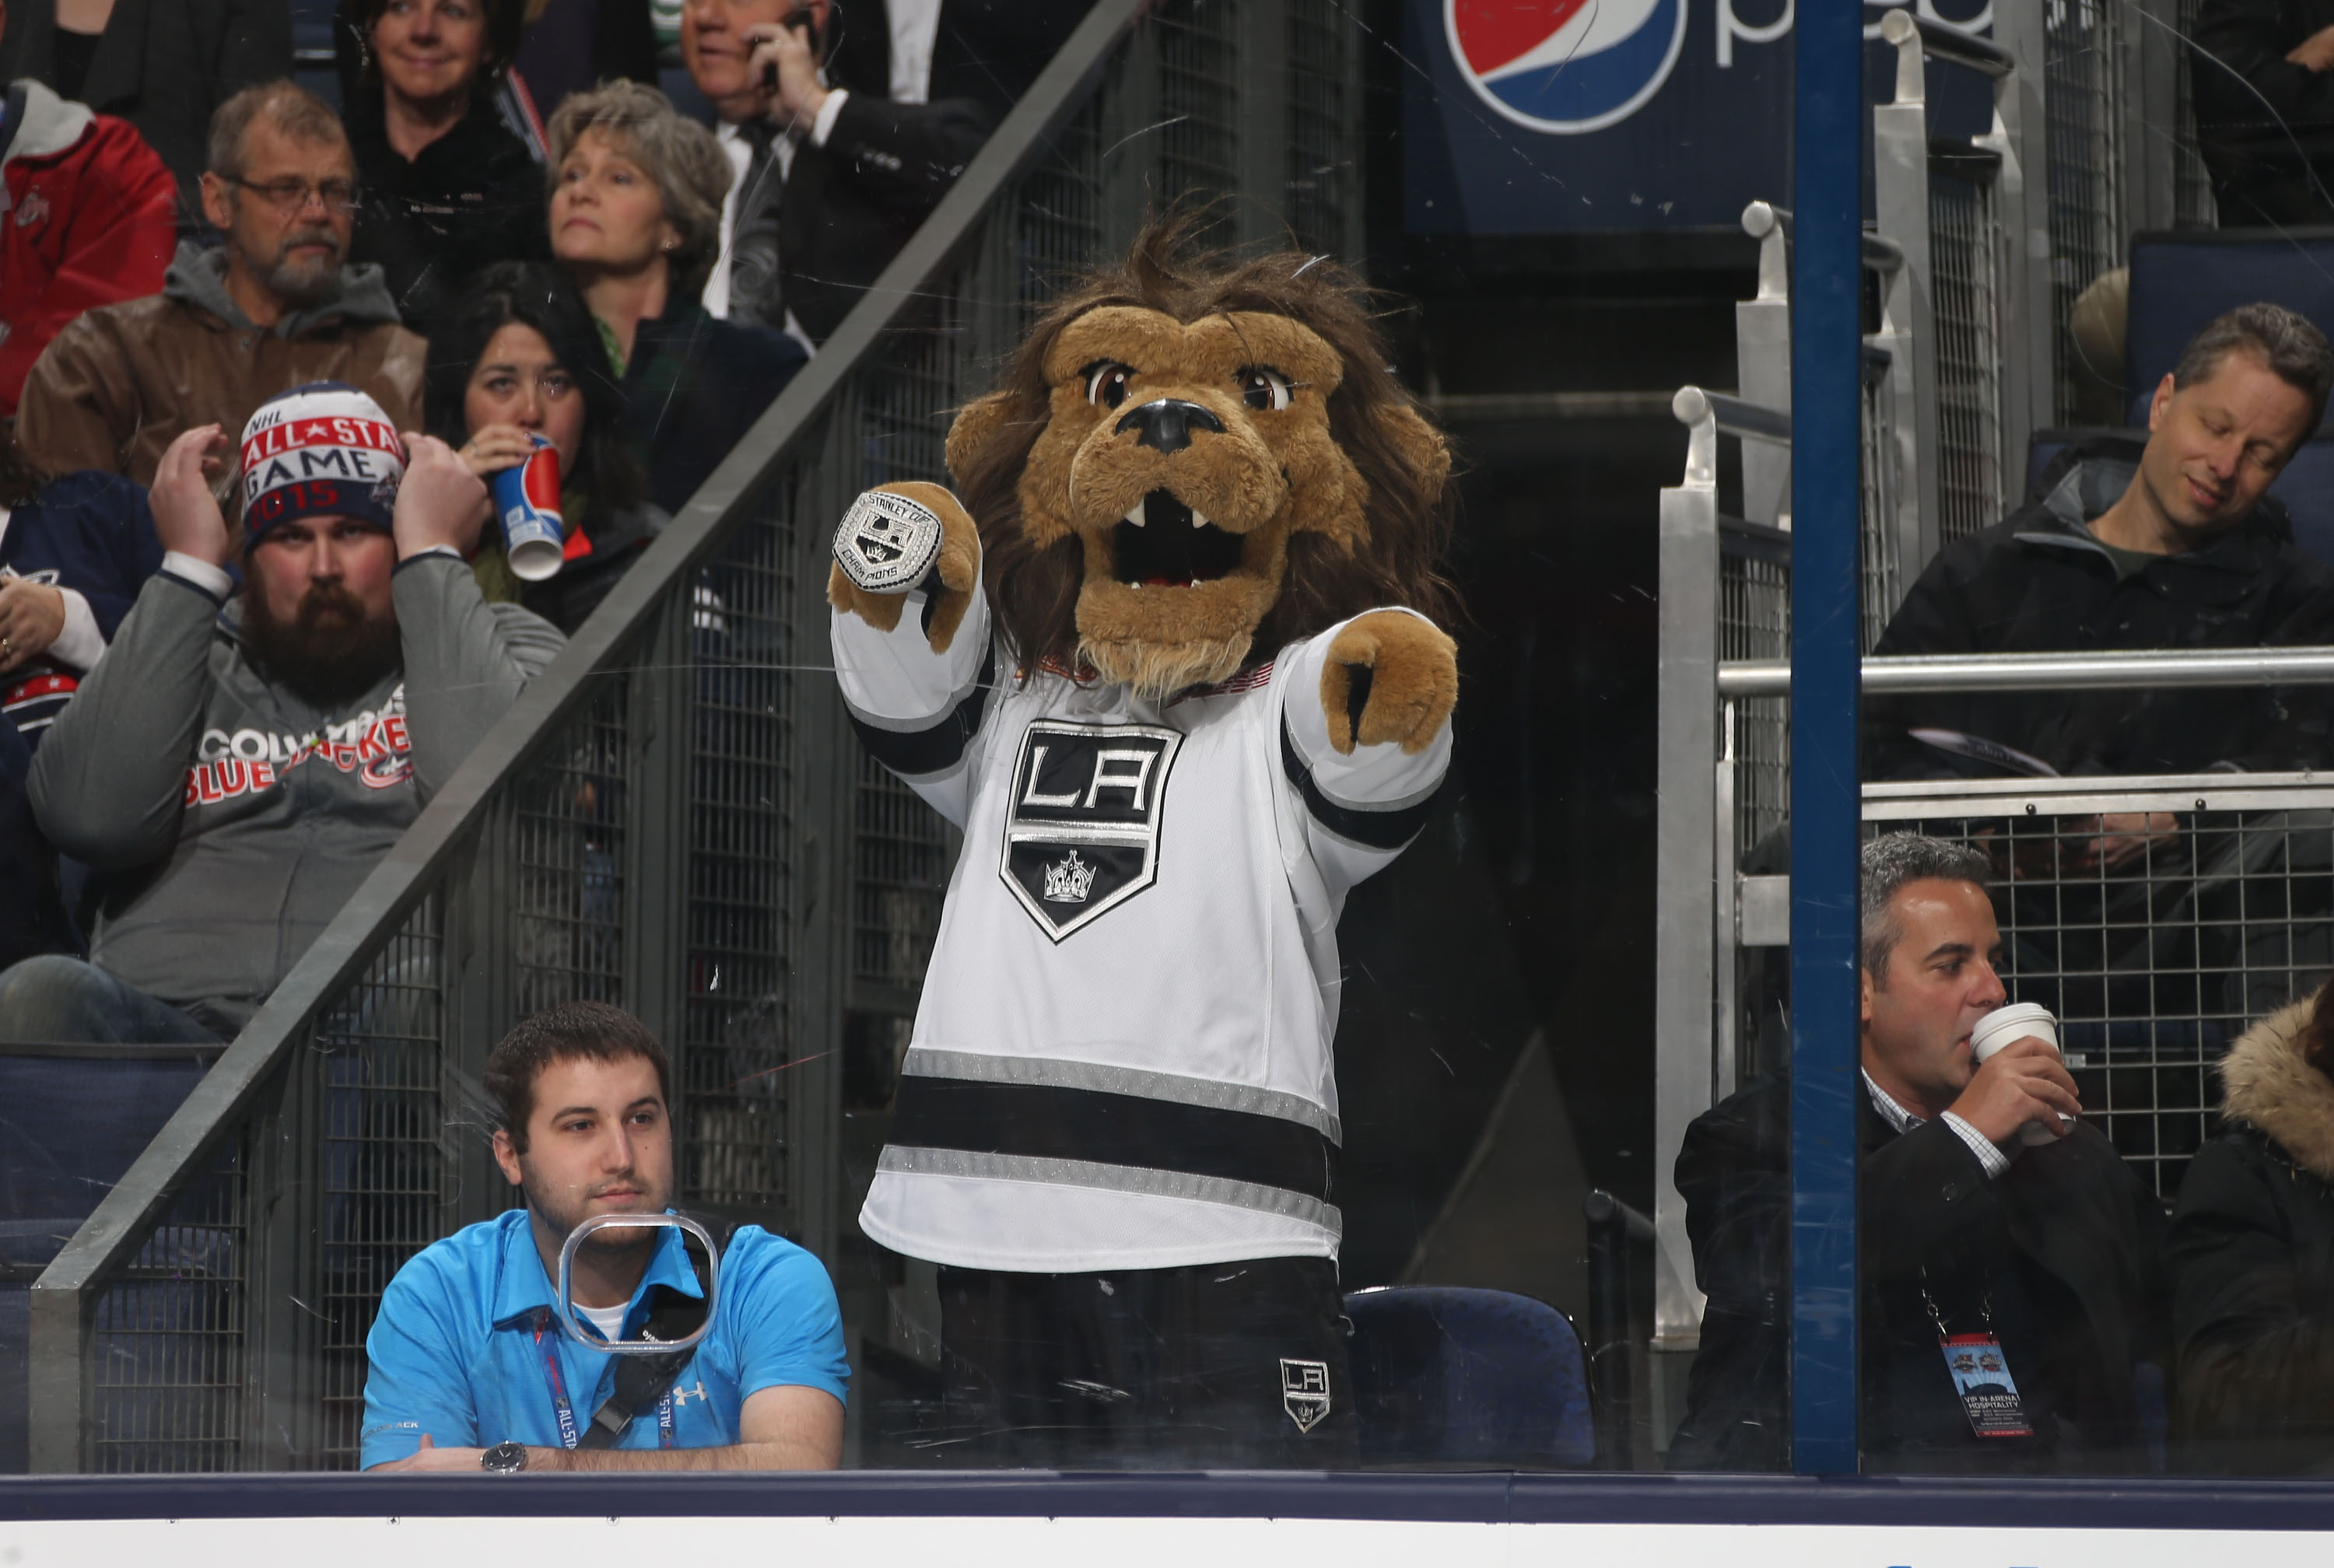 NHL All-Star Skills Competition + Celebrity shootout photo gallery - LA  Kings Insider